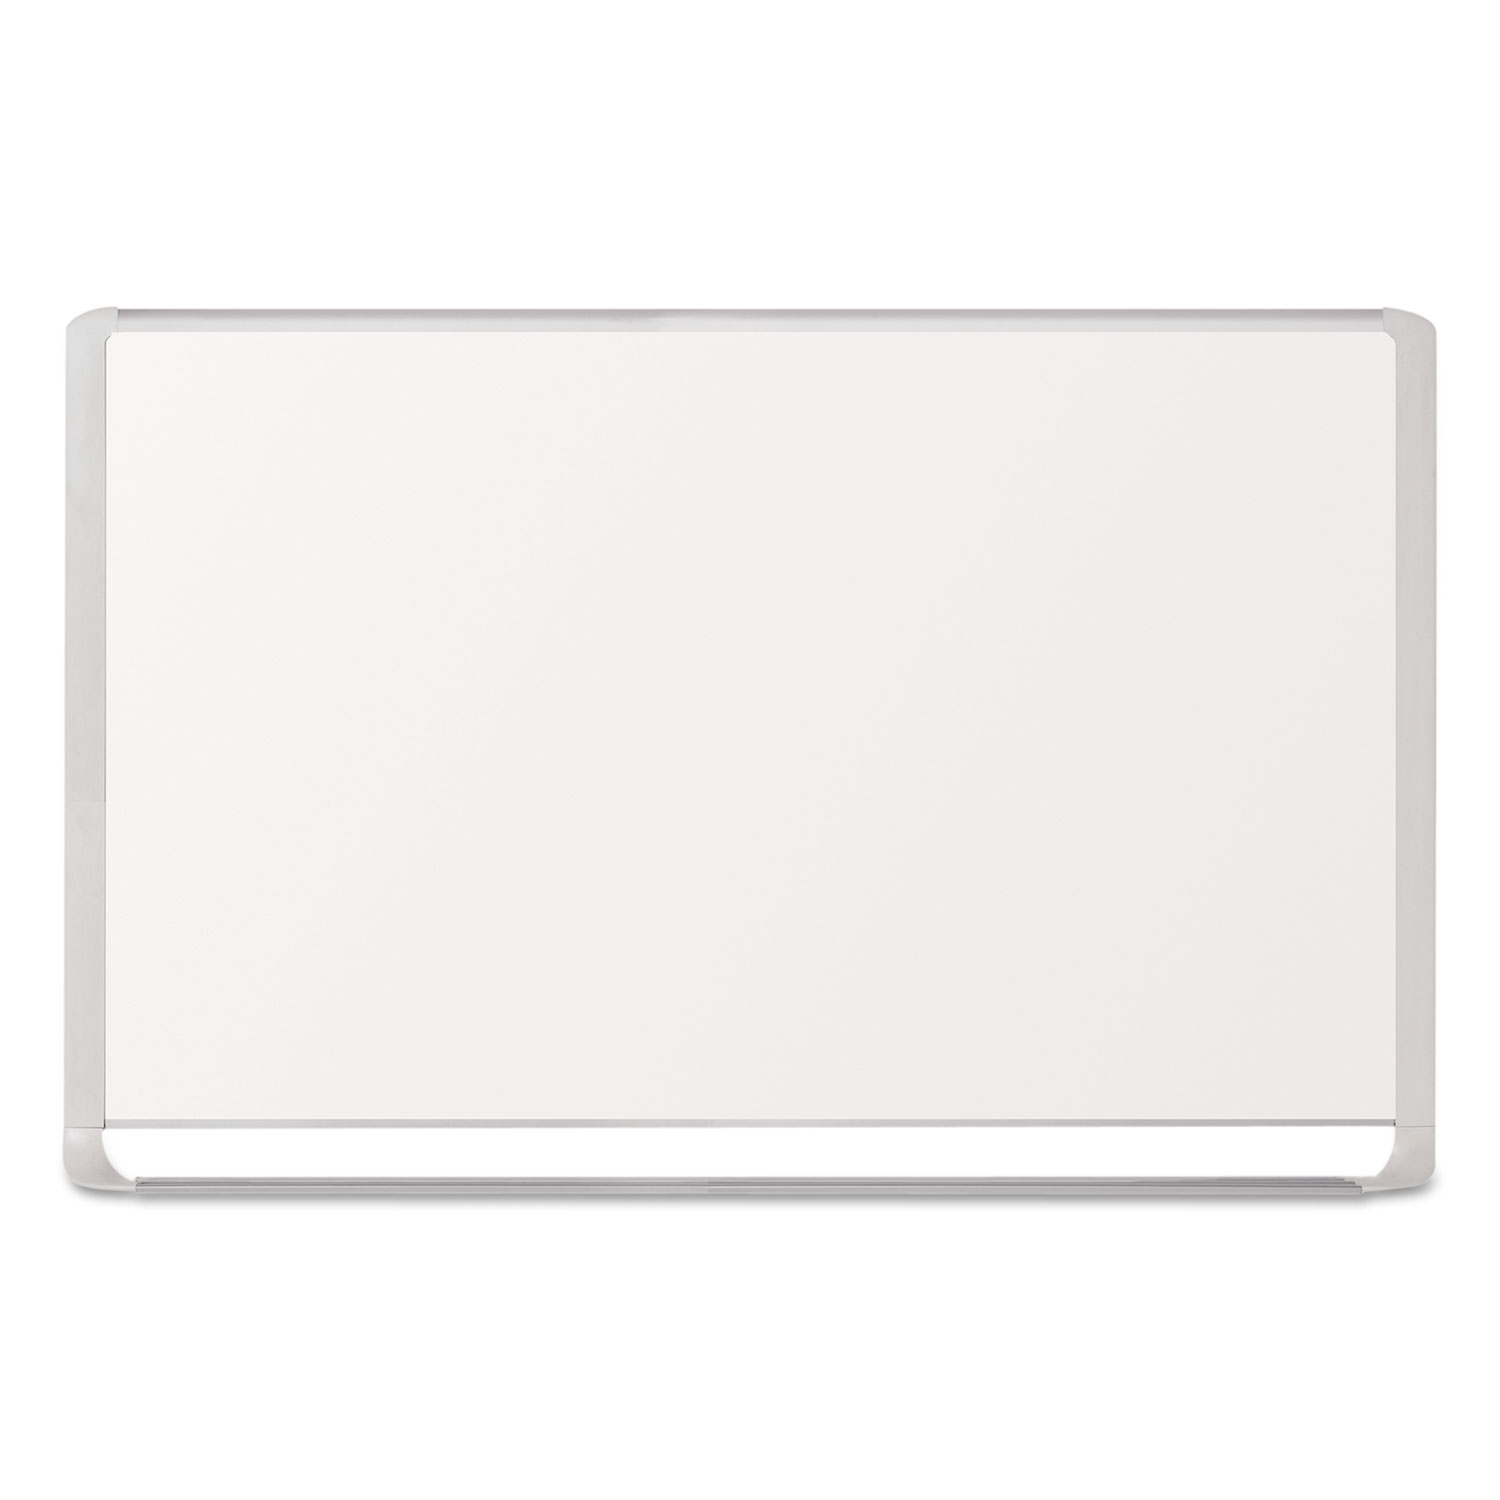 Lacquered steel magnetic dry erase board, 48 x 72, Silver/White